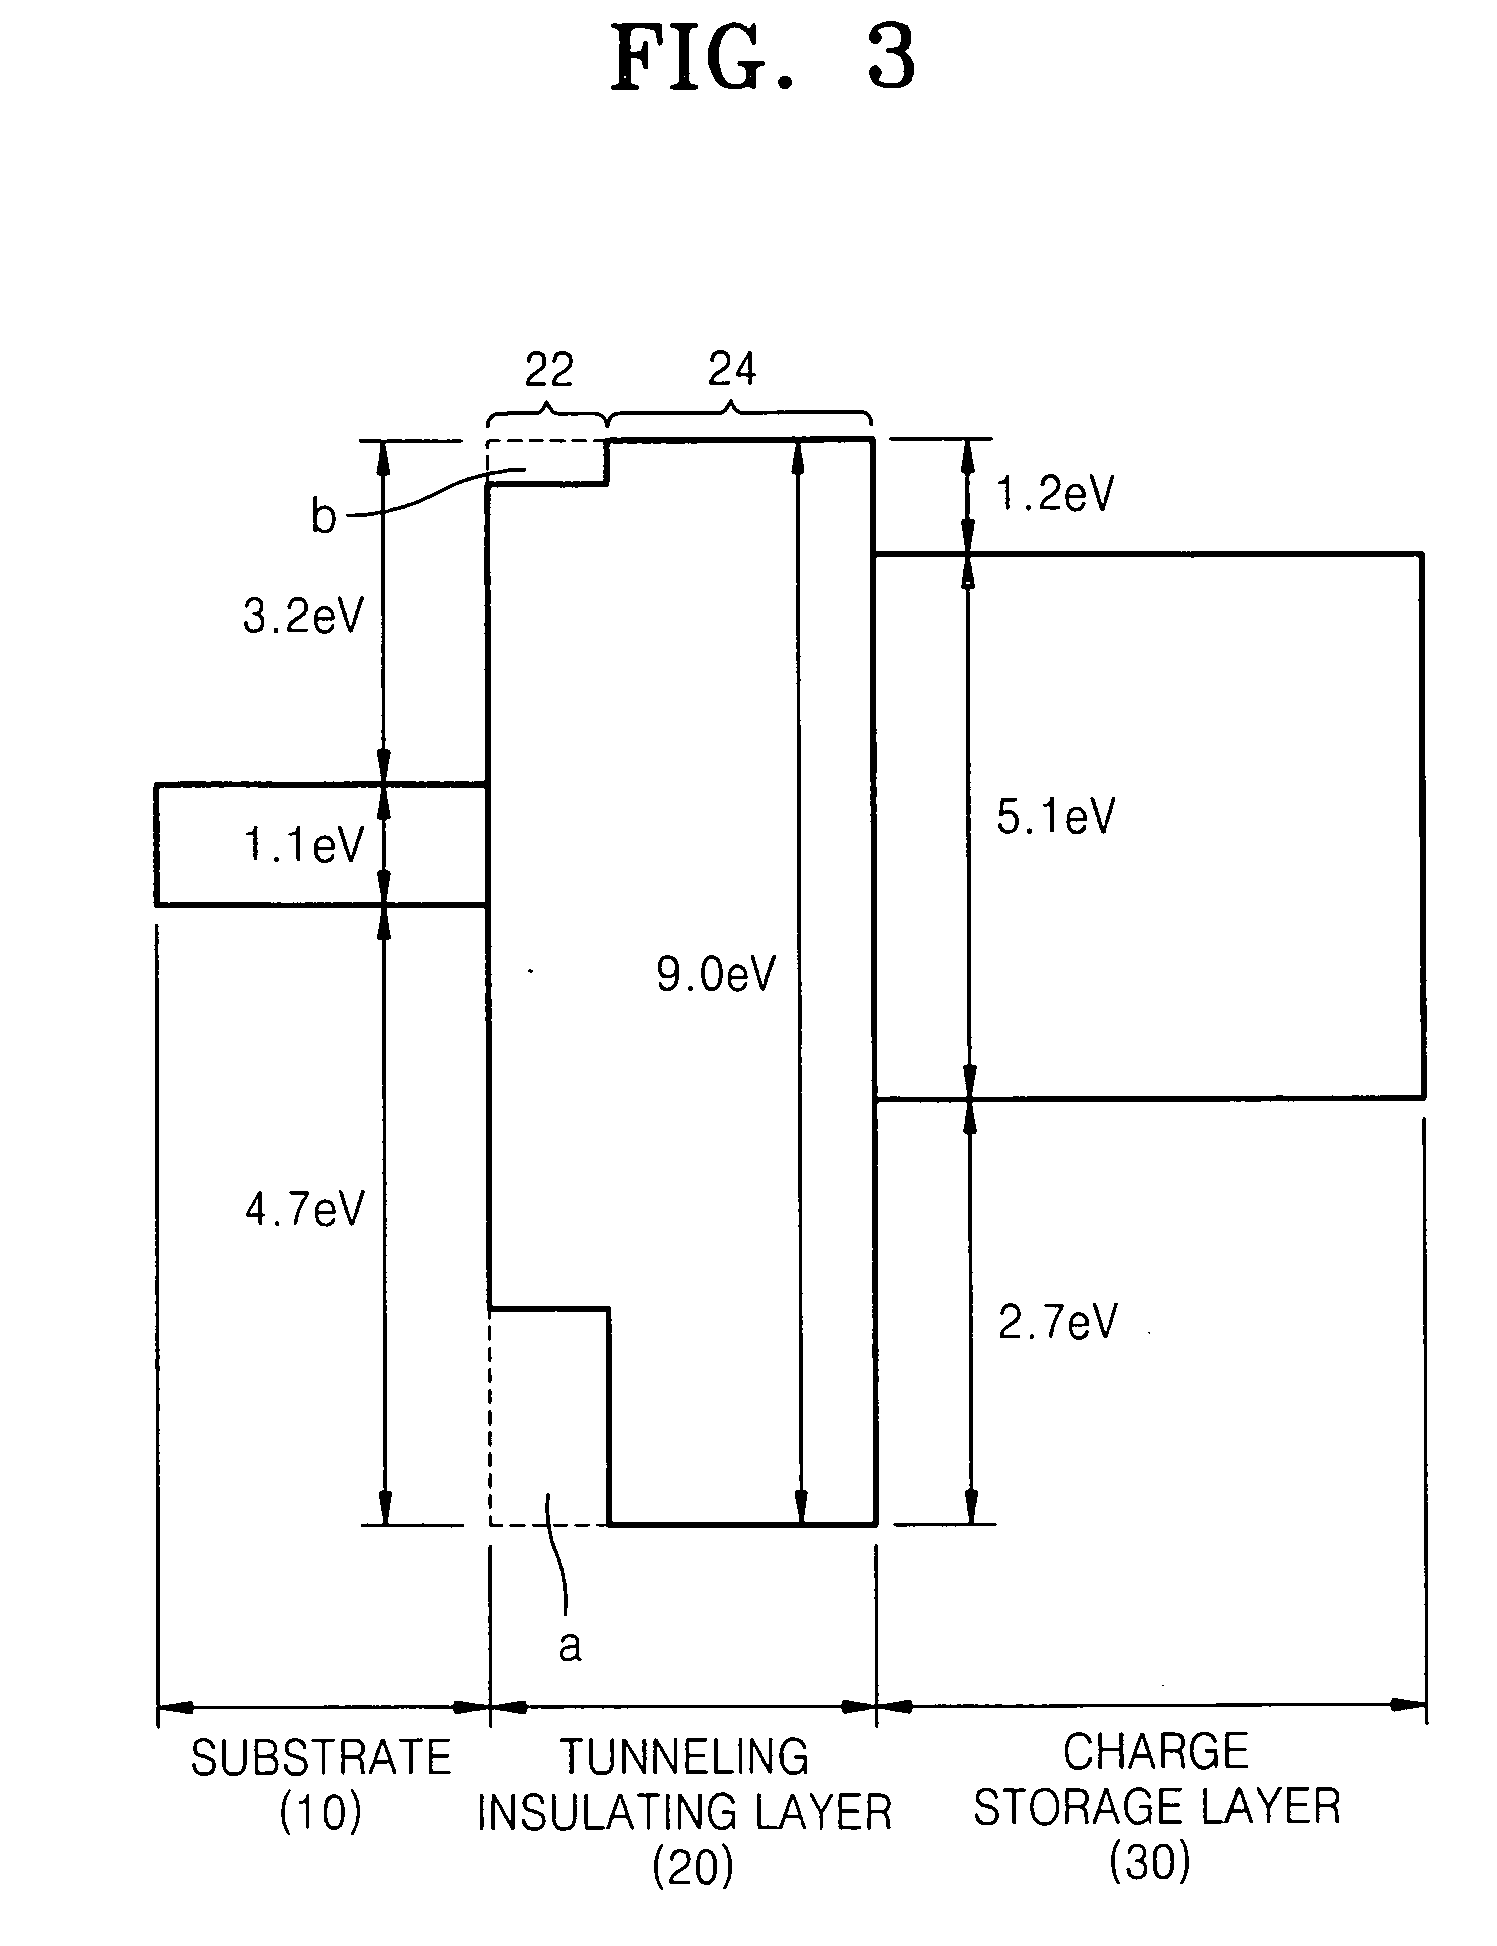 Tunneling insulating layer, flash memory device including the same, memory card and system including the flash memory device, and methods of manufacturing the same